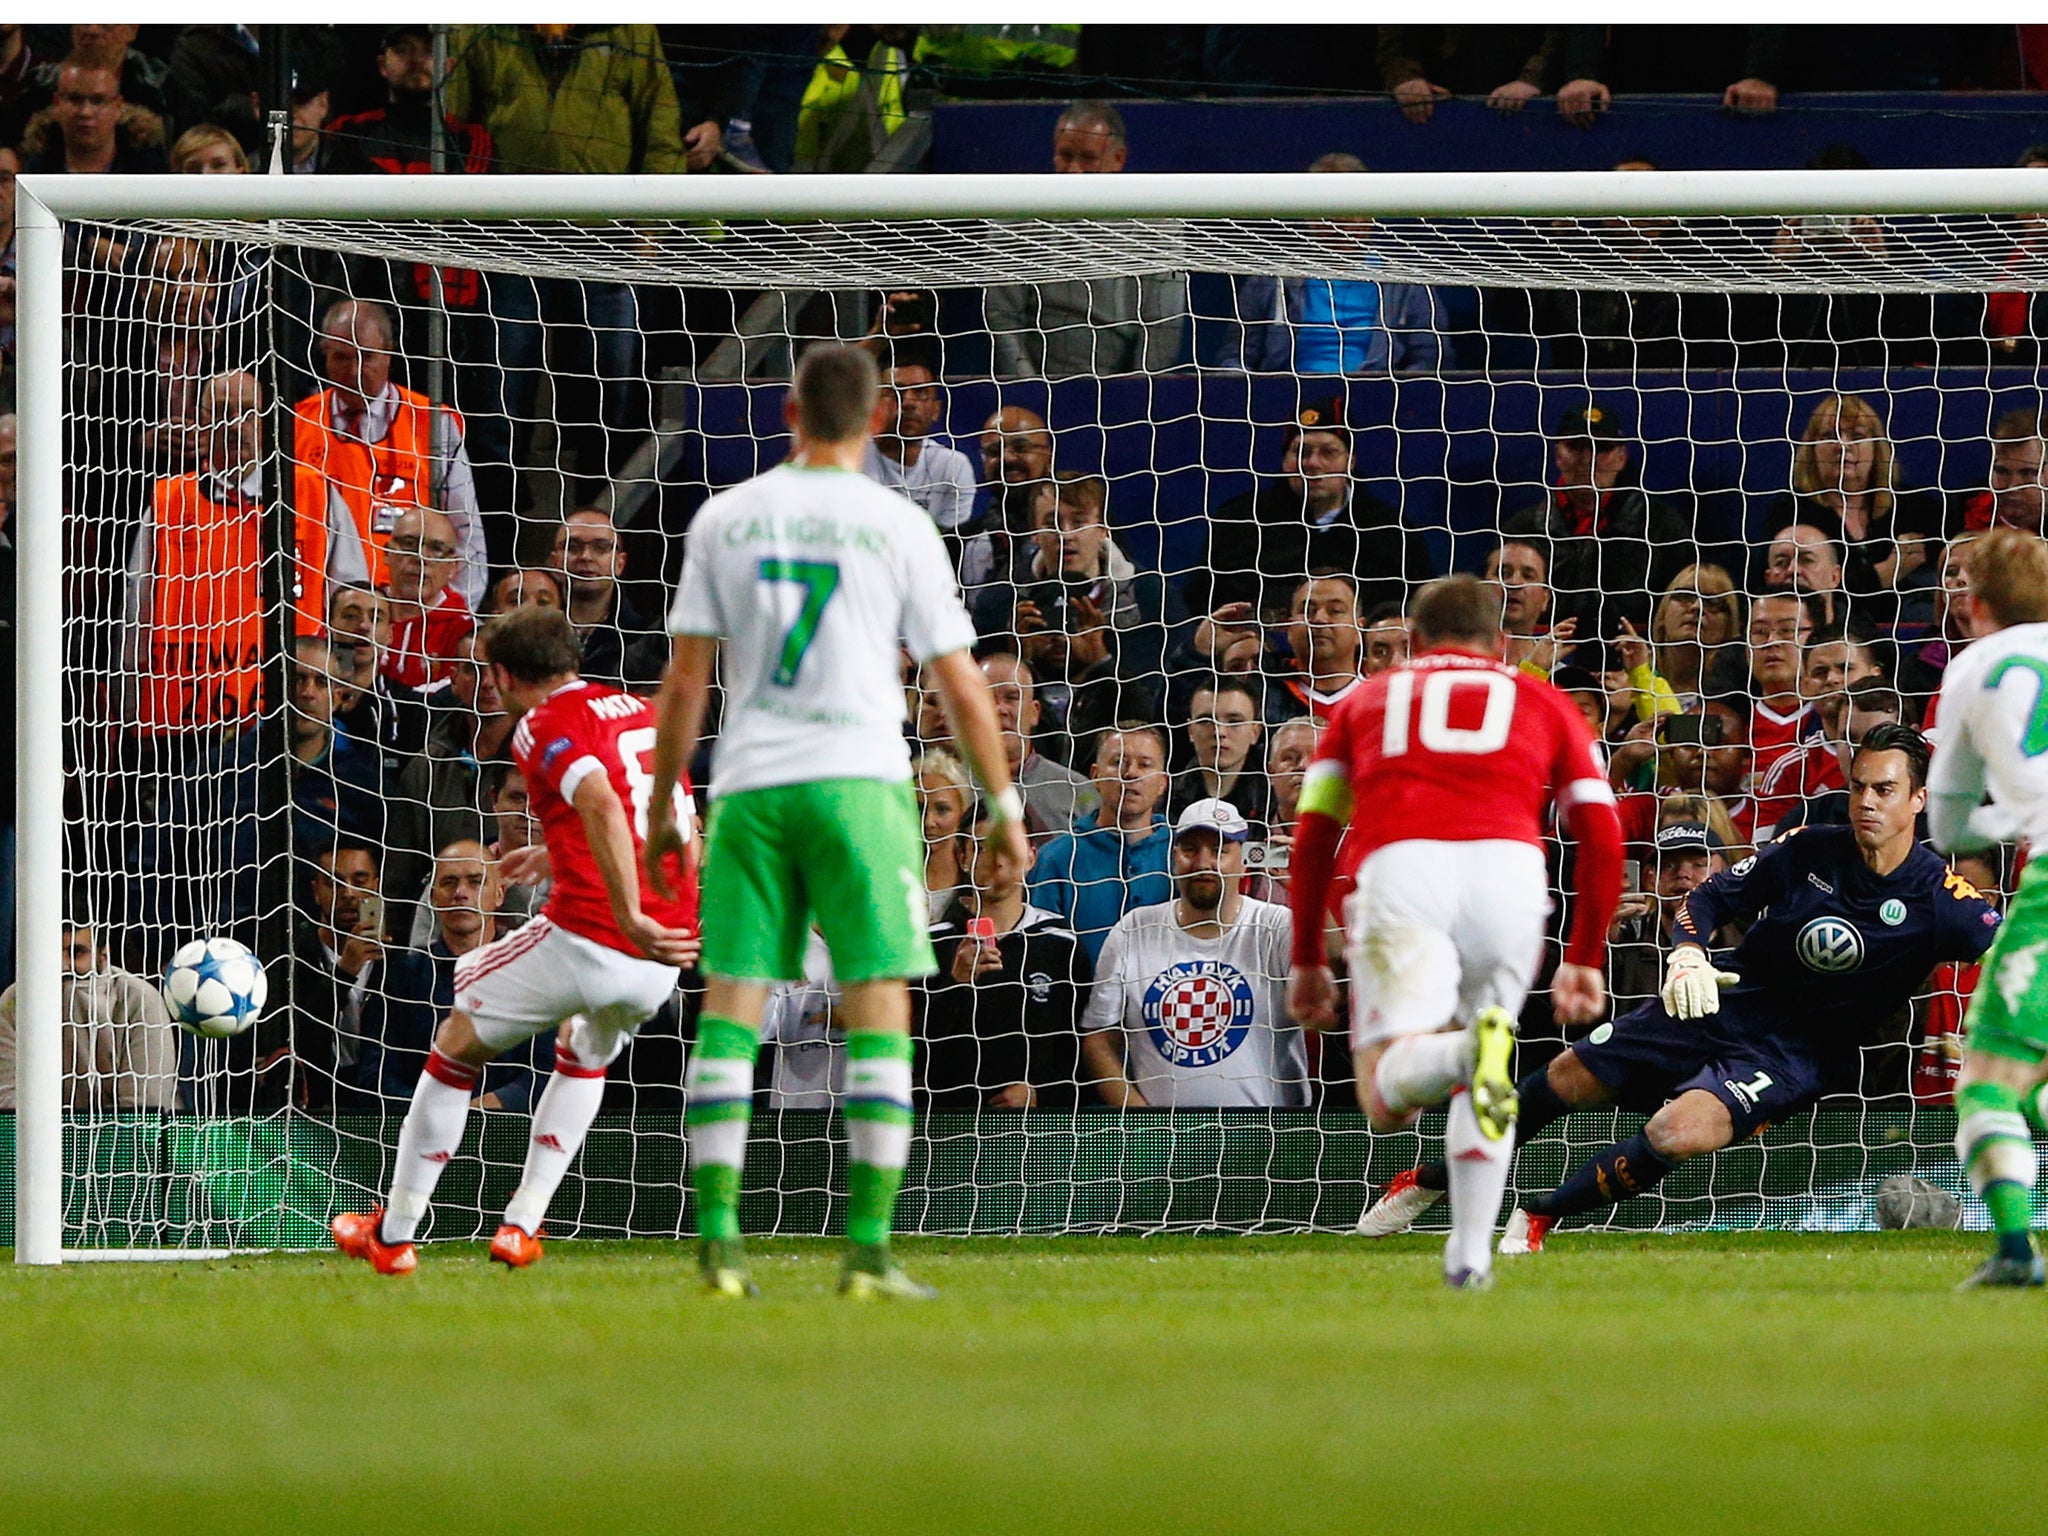 Juan Mata equalises from the penalty spot